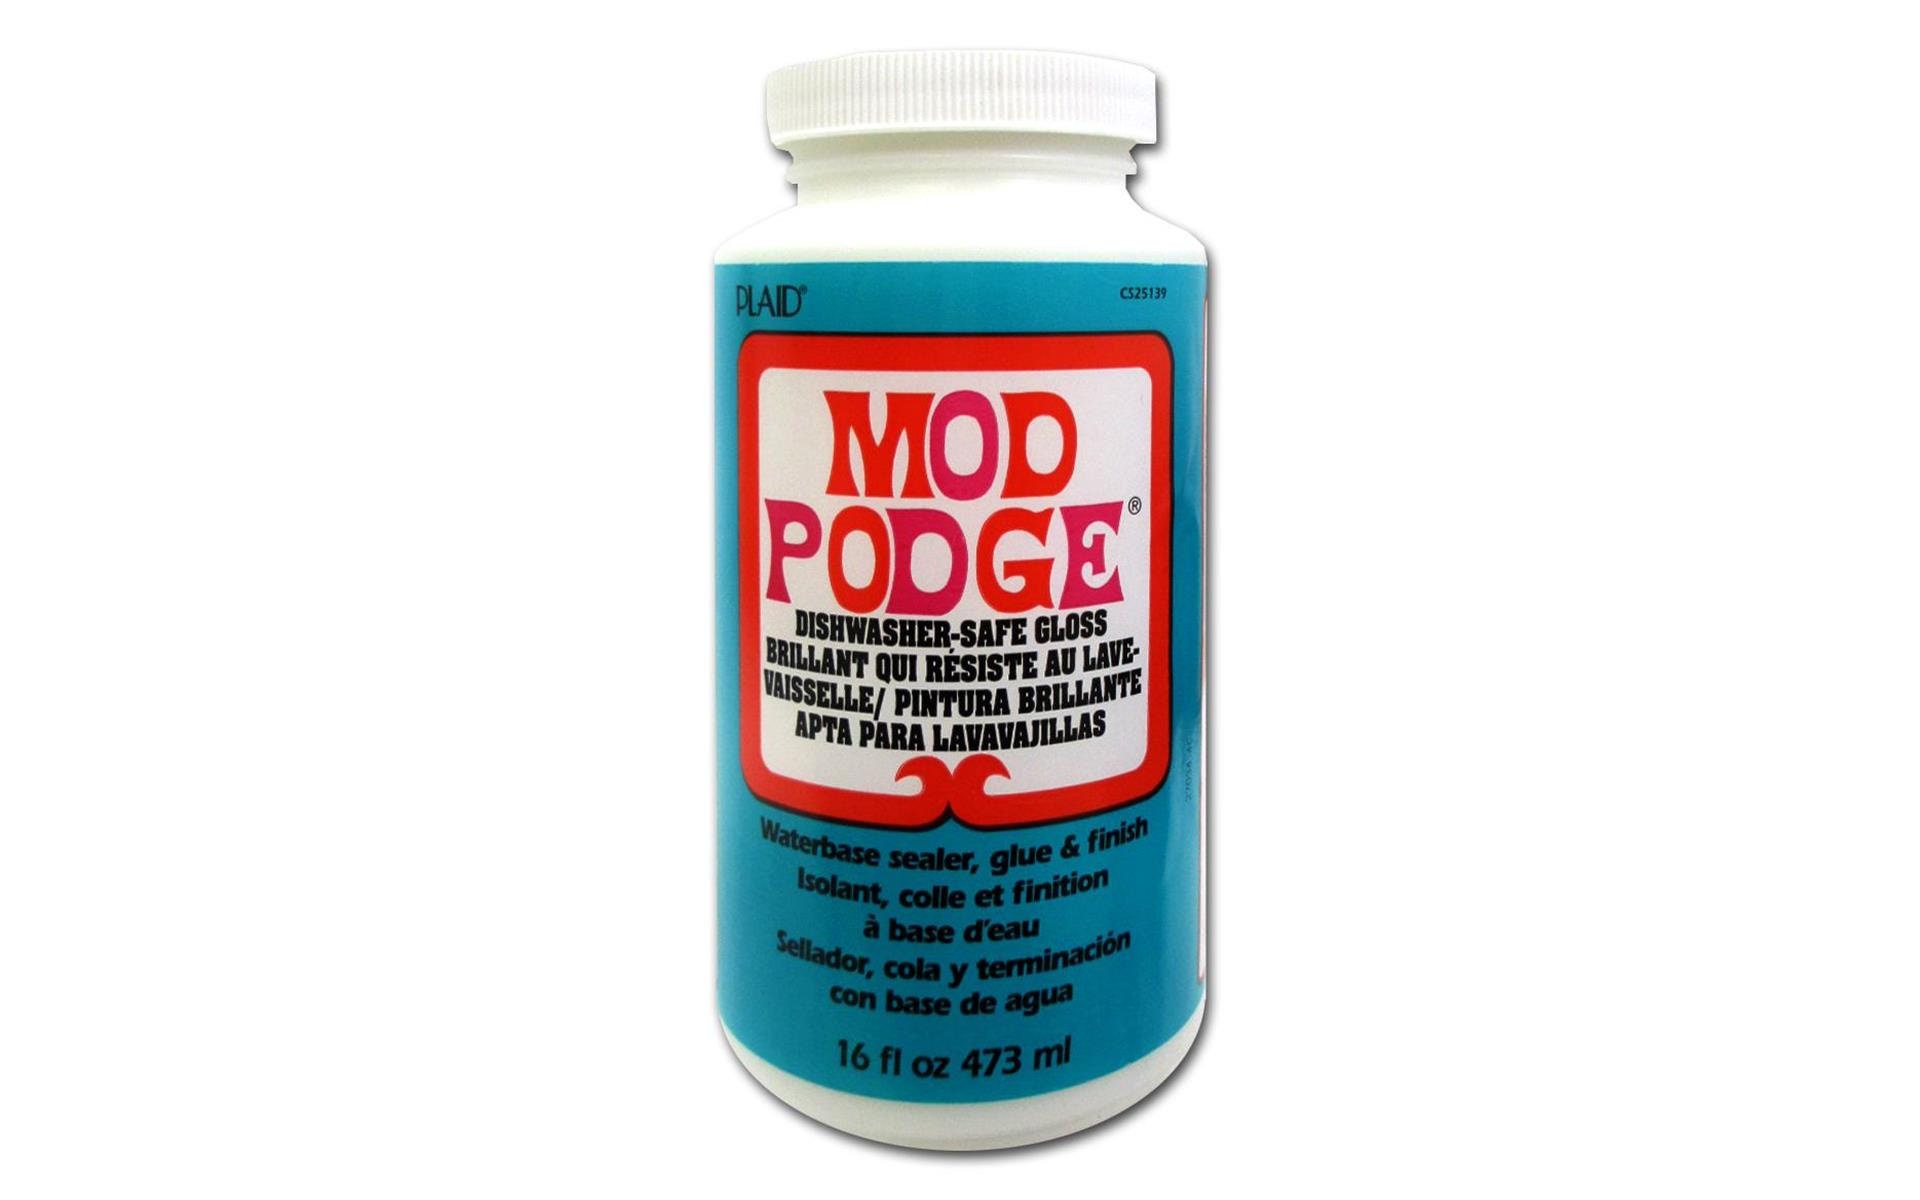 Craft Product Review: Mod Podge Dishwasher Safe Gloss